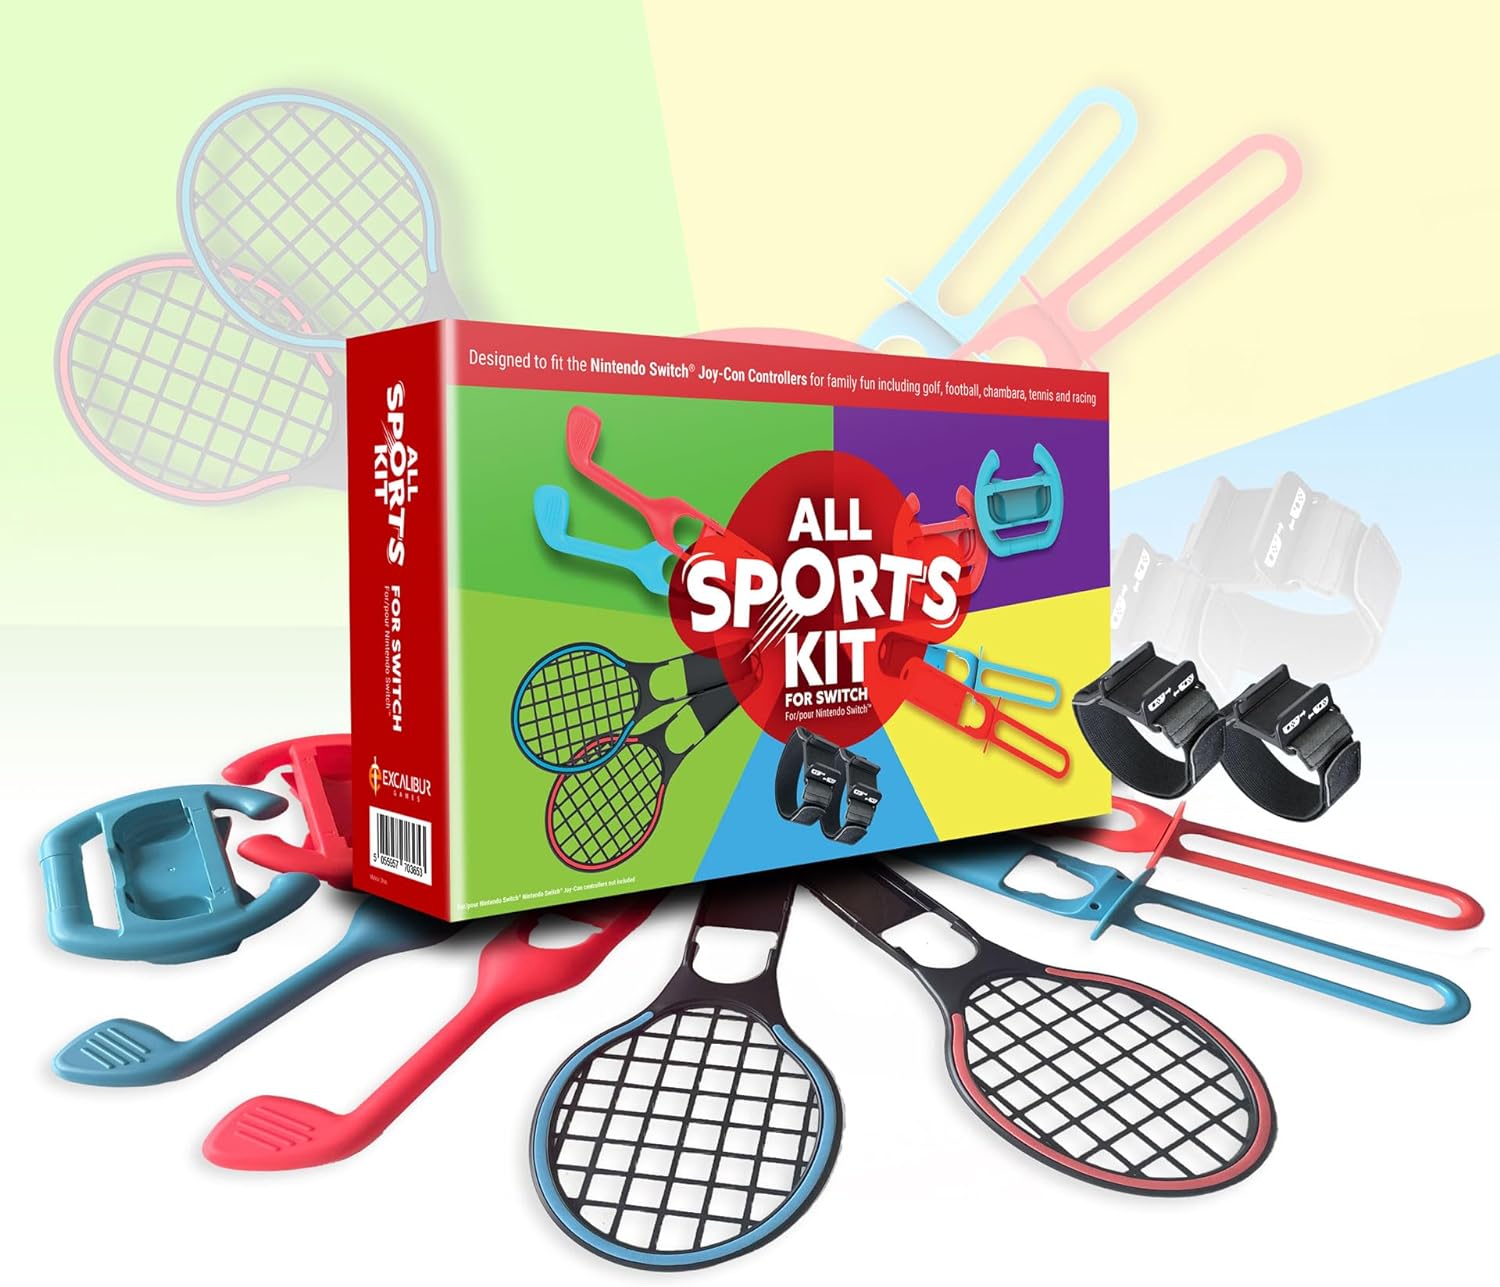 All Sports Kit for Nintendo Switch